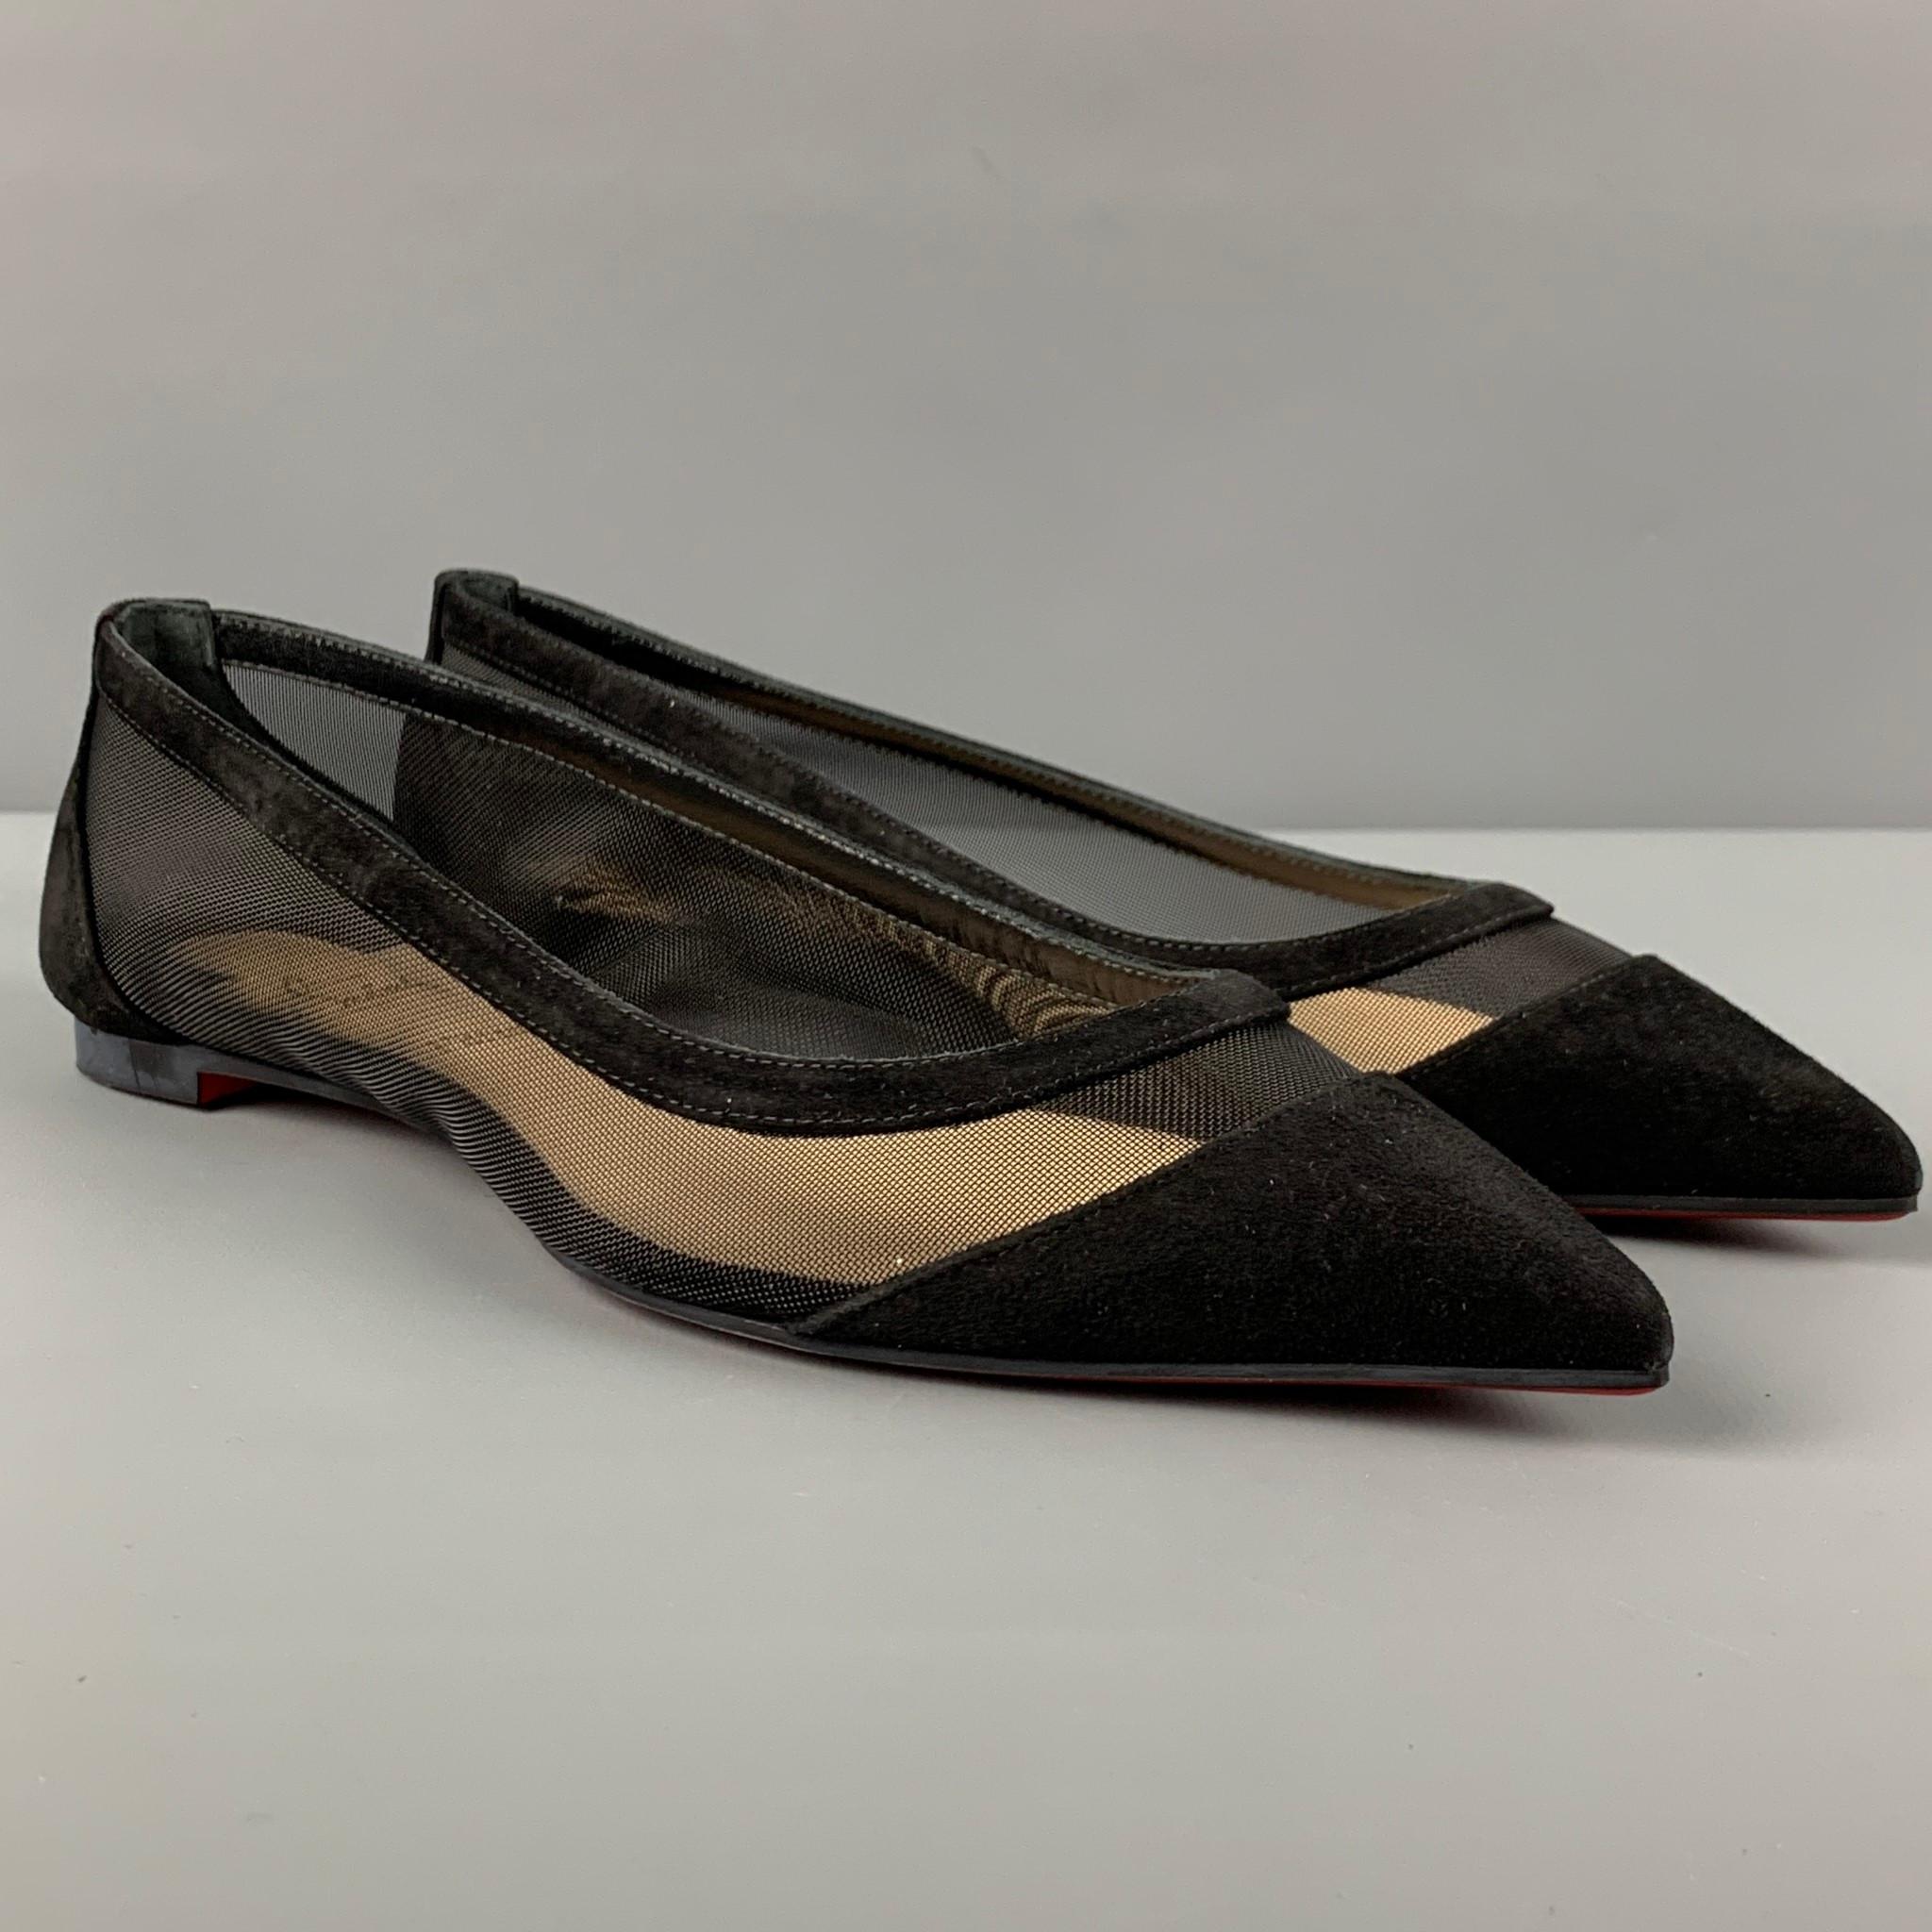 CHRISTIAN LOUBOUTIN 'Galativi' flats comes in a black suede with a mesh panel featuring a pointed toe and signature red sole. Includes box. Made in Italy. 

Excellent Pre-Owned Condition.
Marked: 37

Outsole: 10.5 in. x 3.25 in. 